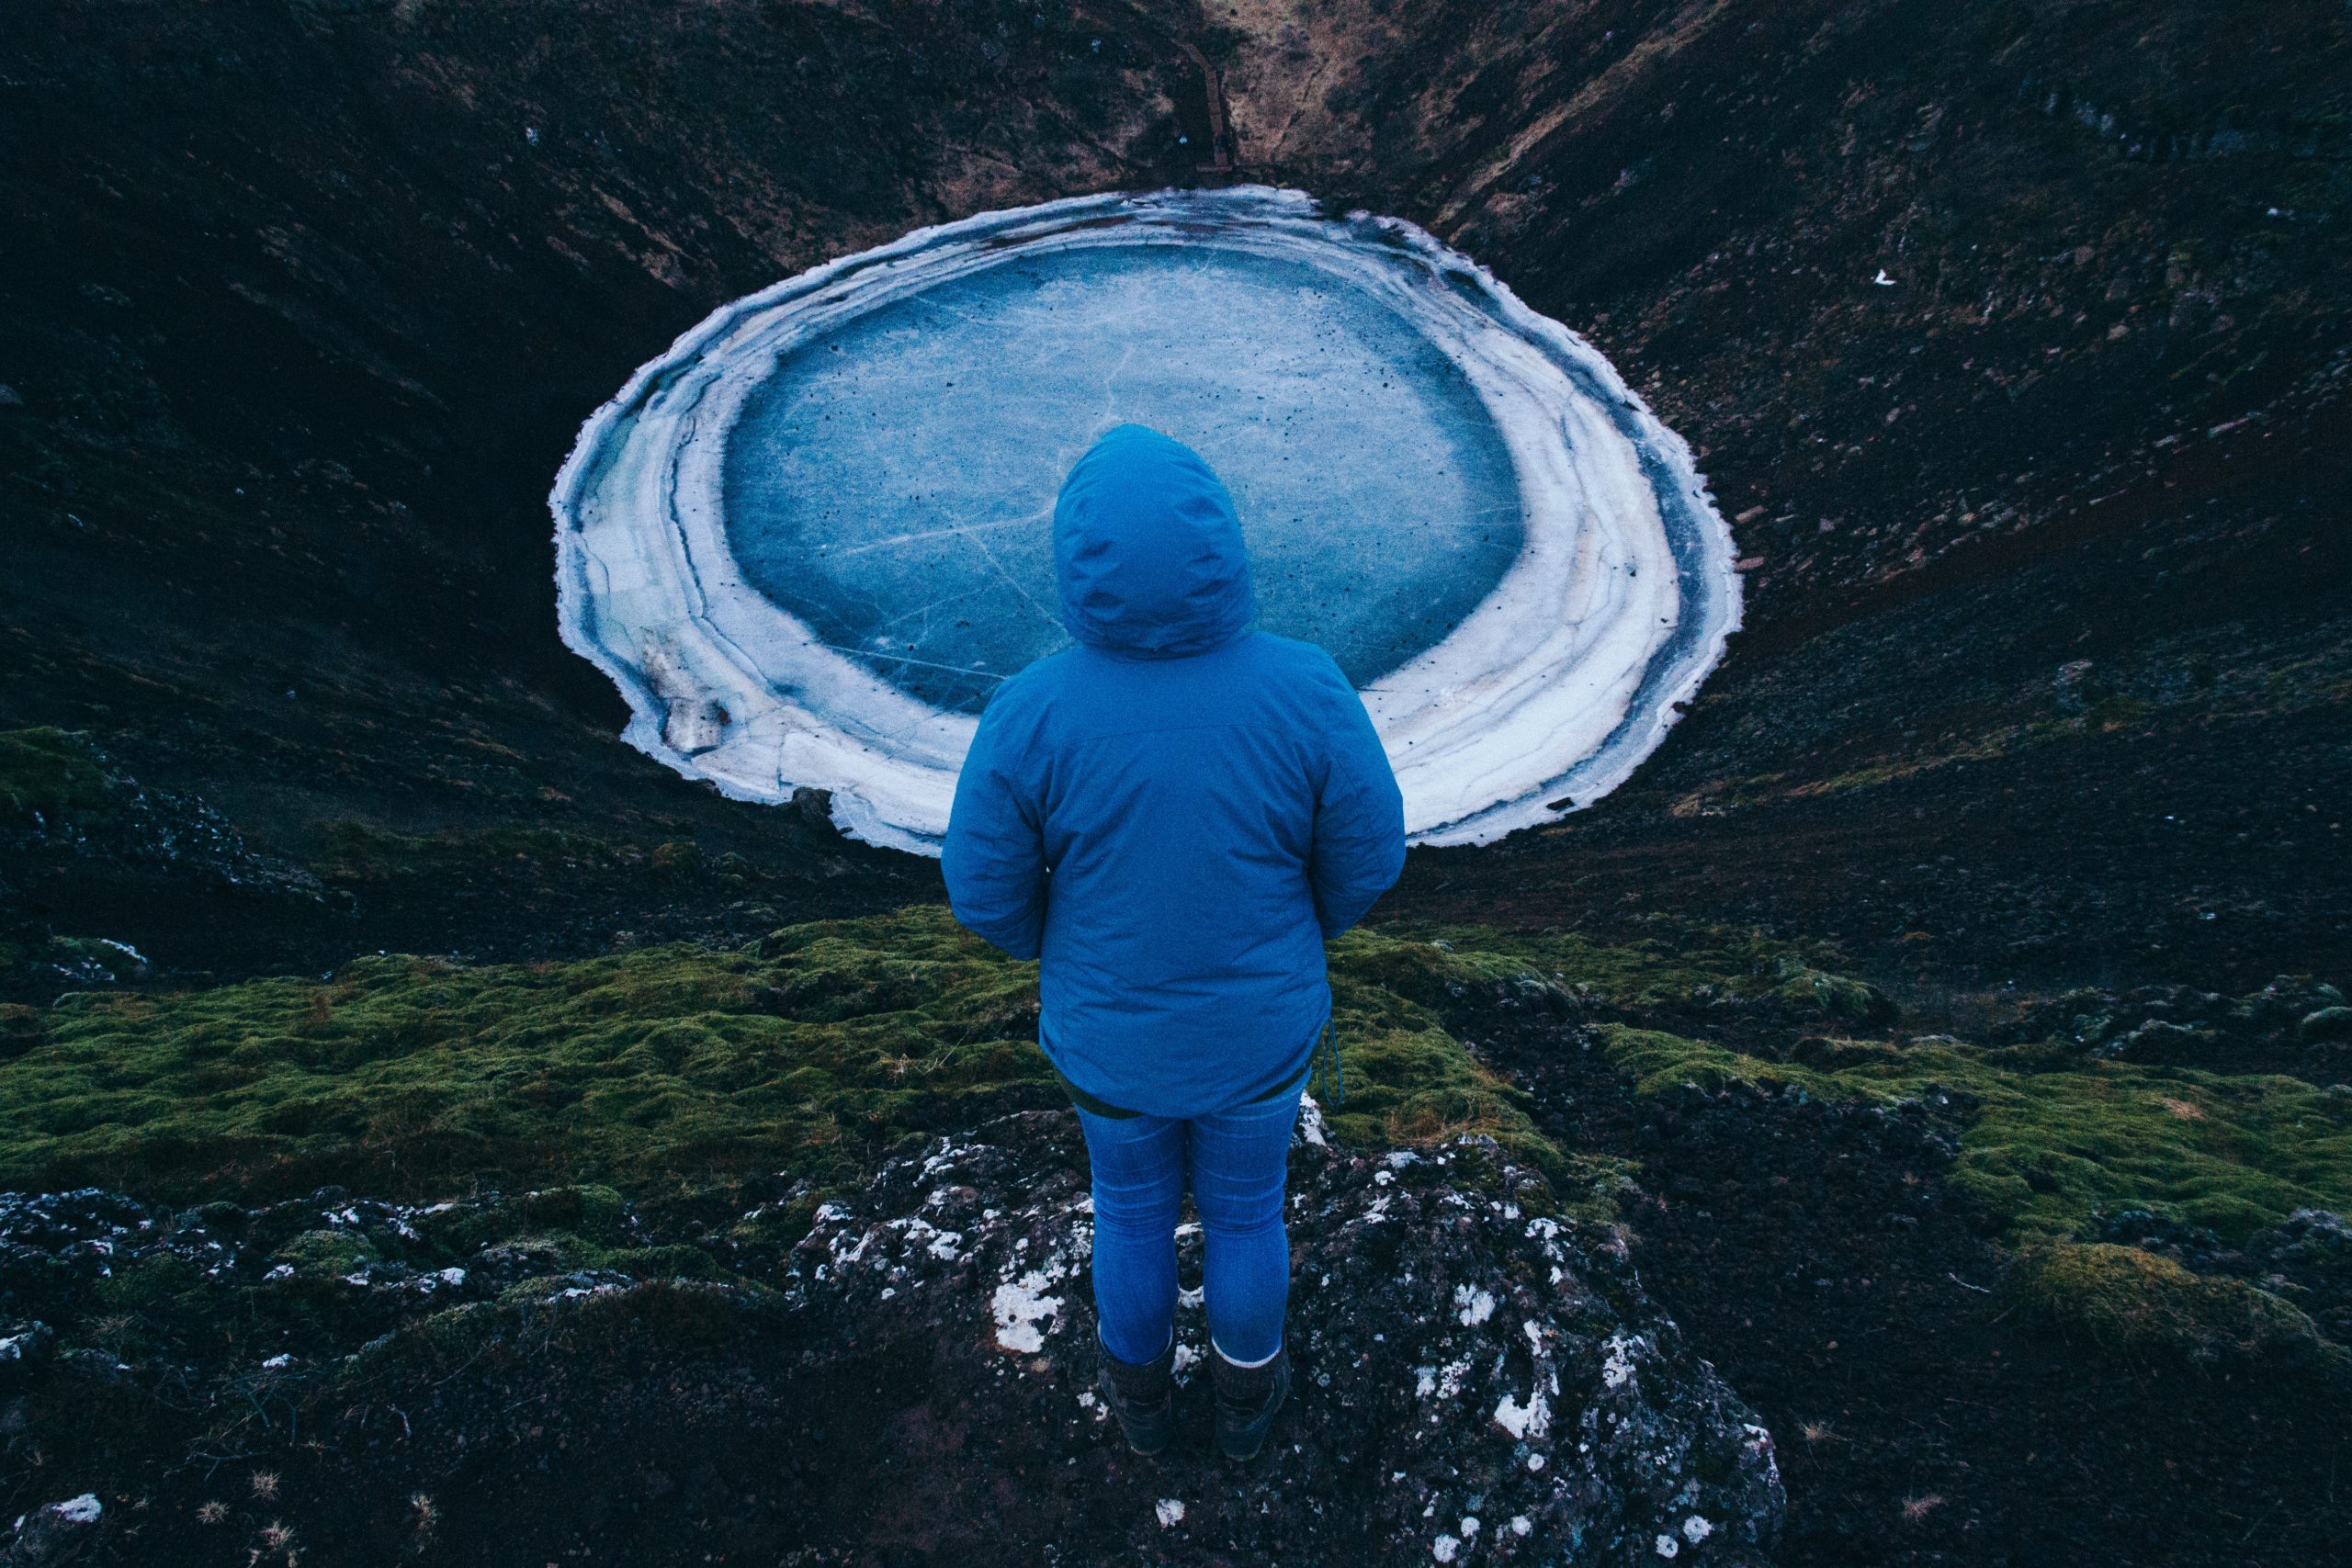 A woman looks kerið crater and its frozen pool